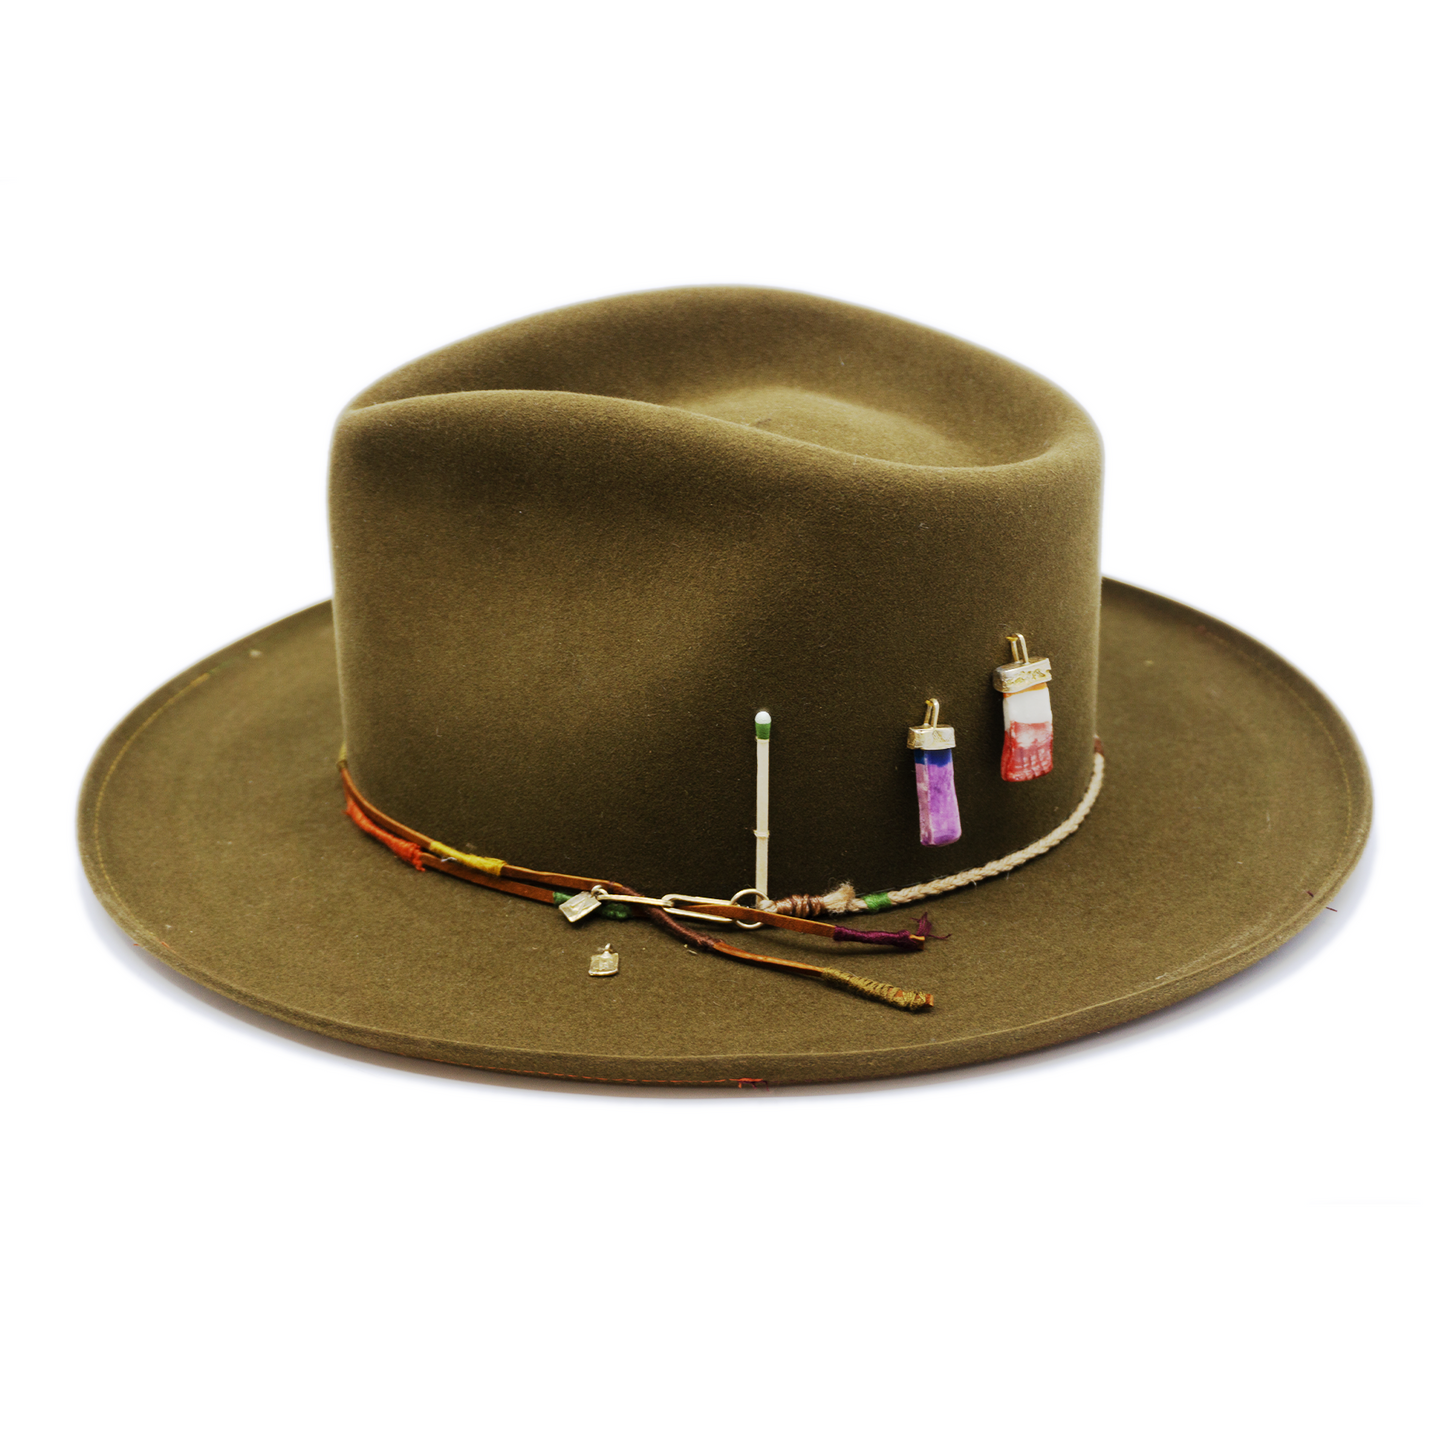 100% felt hat in New Green  Western  Weight   Braided twine and suede cord   with multicolor accents  threads   Italian ceramic pieces  on crown  Pencil curled  brim  Made in USA